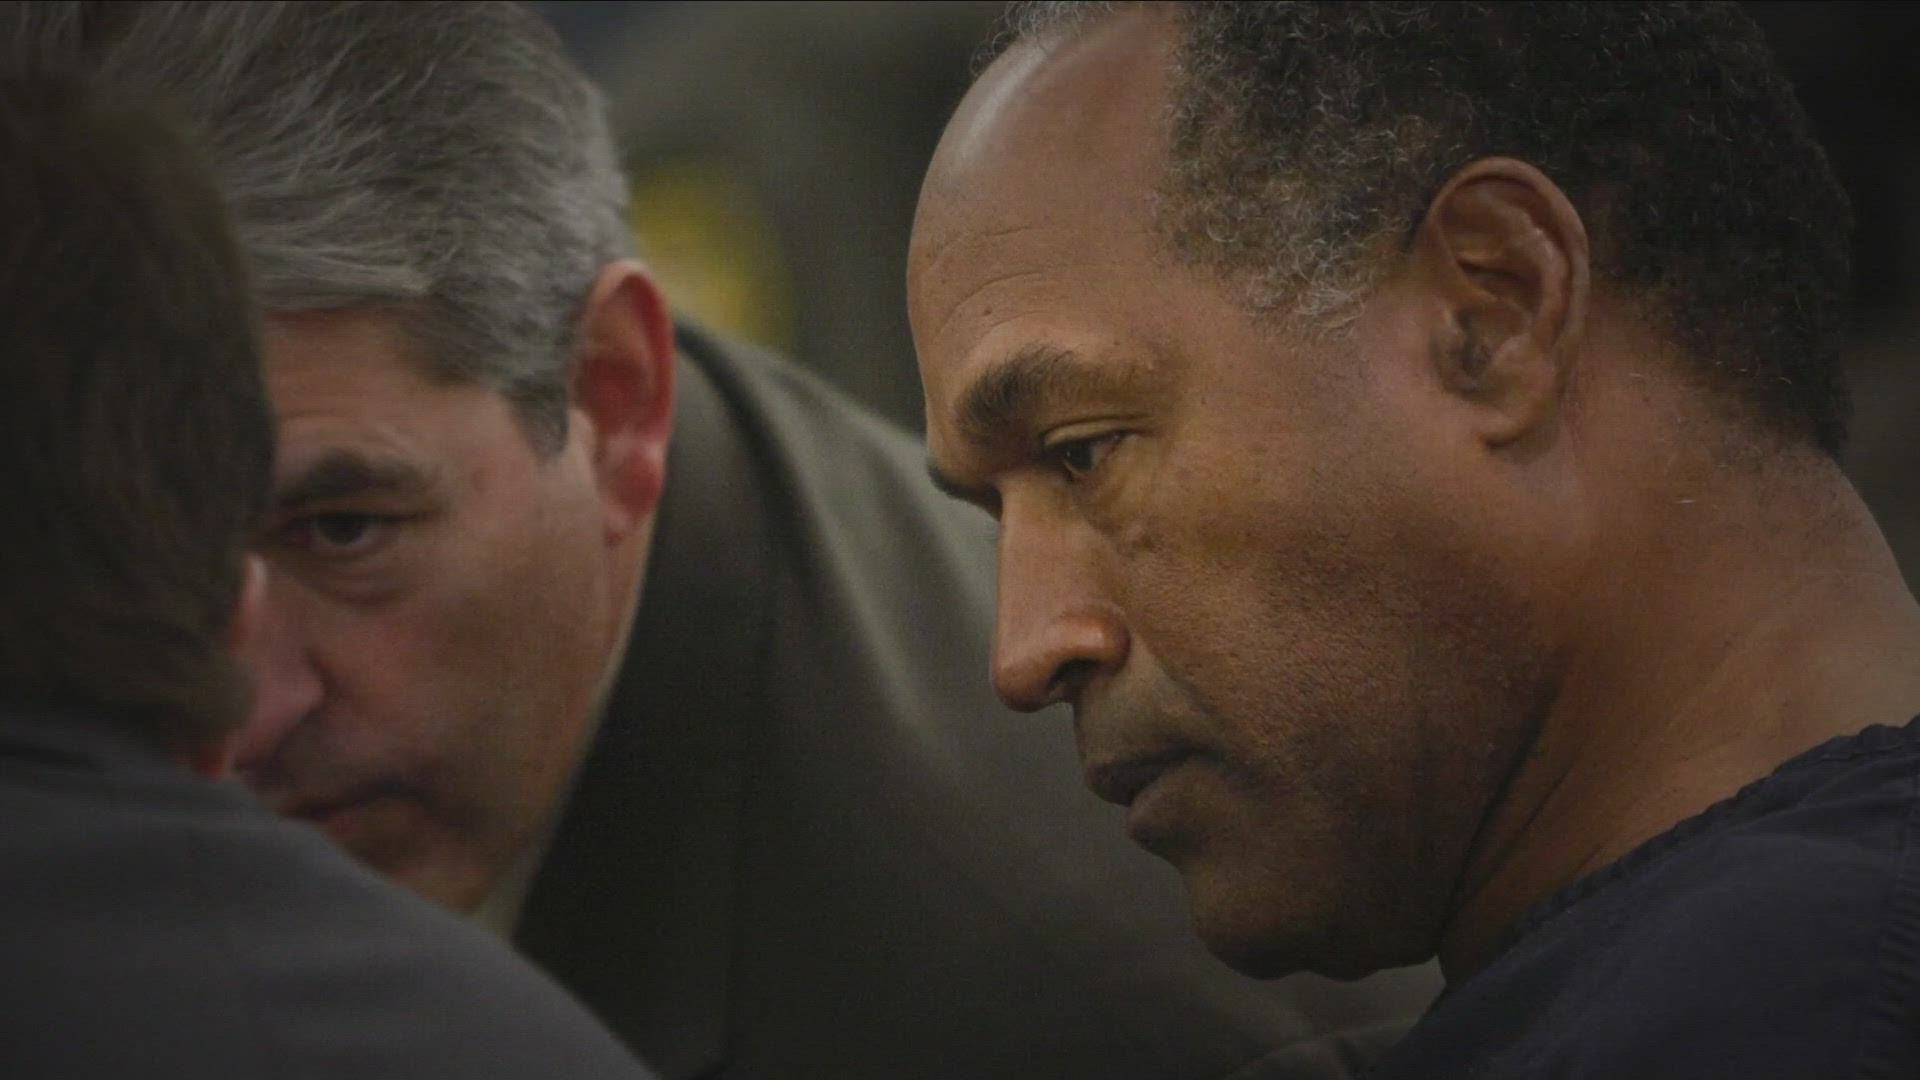 Midday Updates: OJ Simpson passes away due to cancer on April 10th